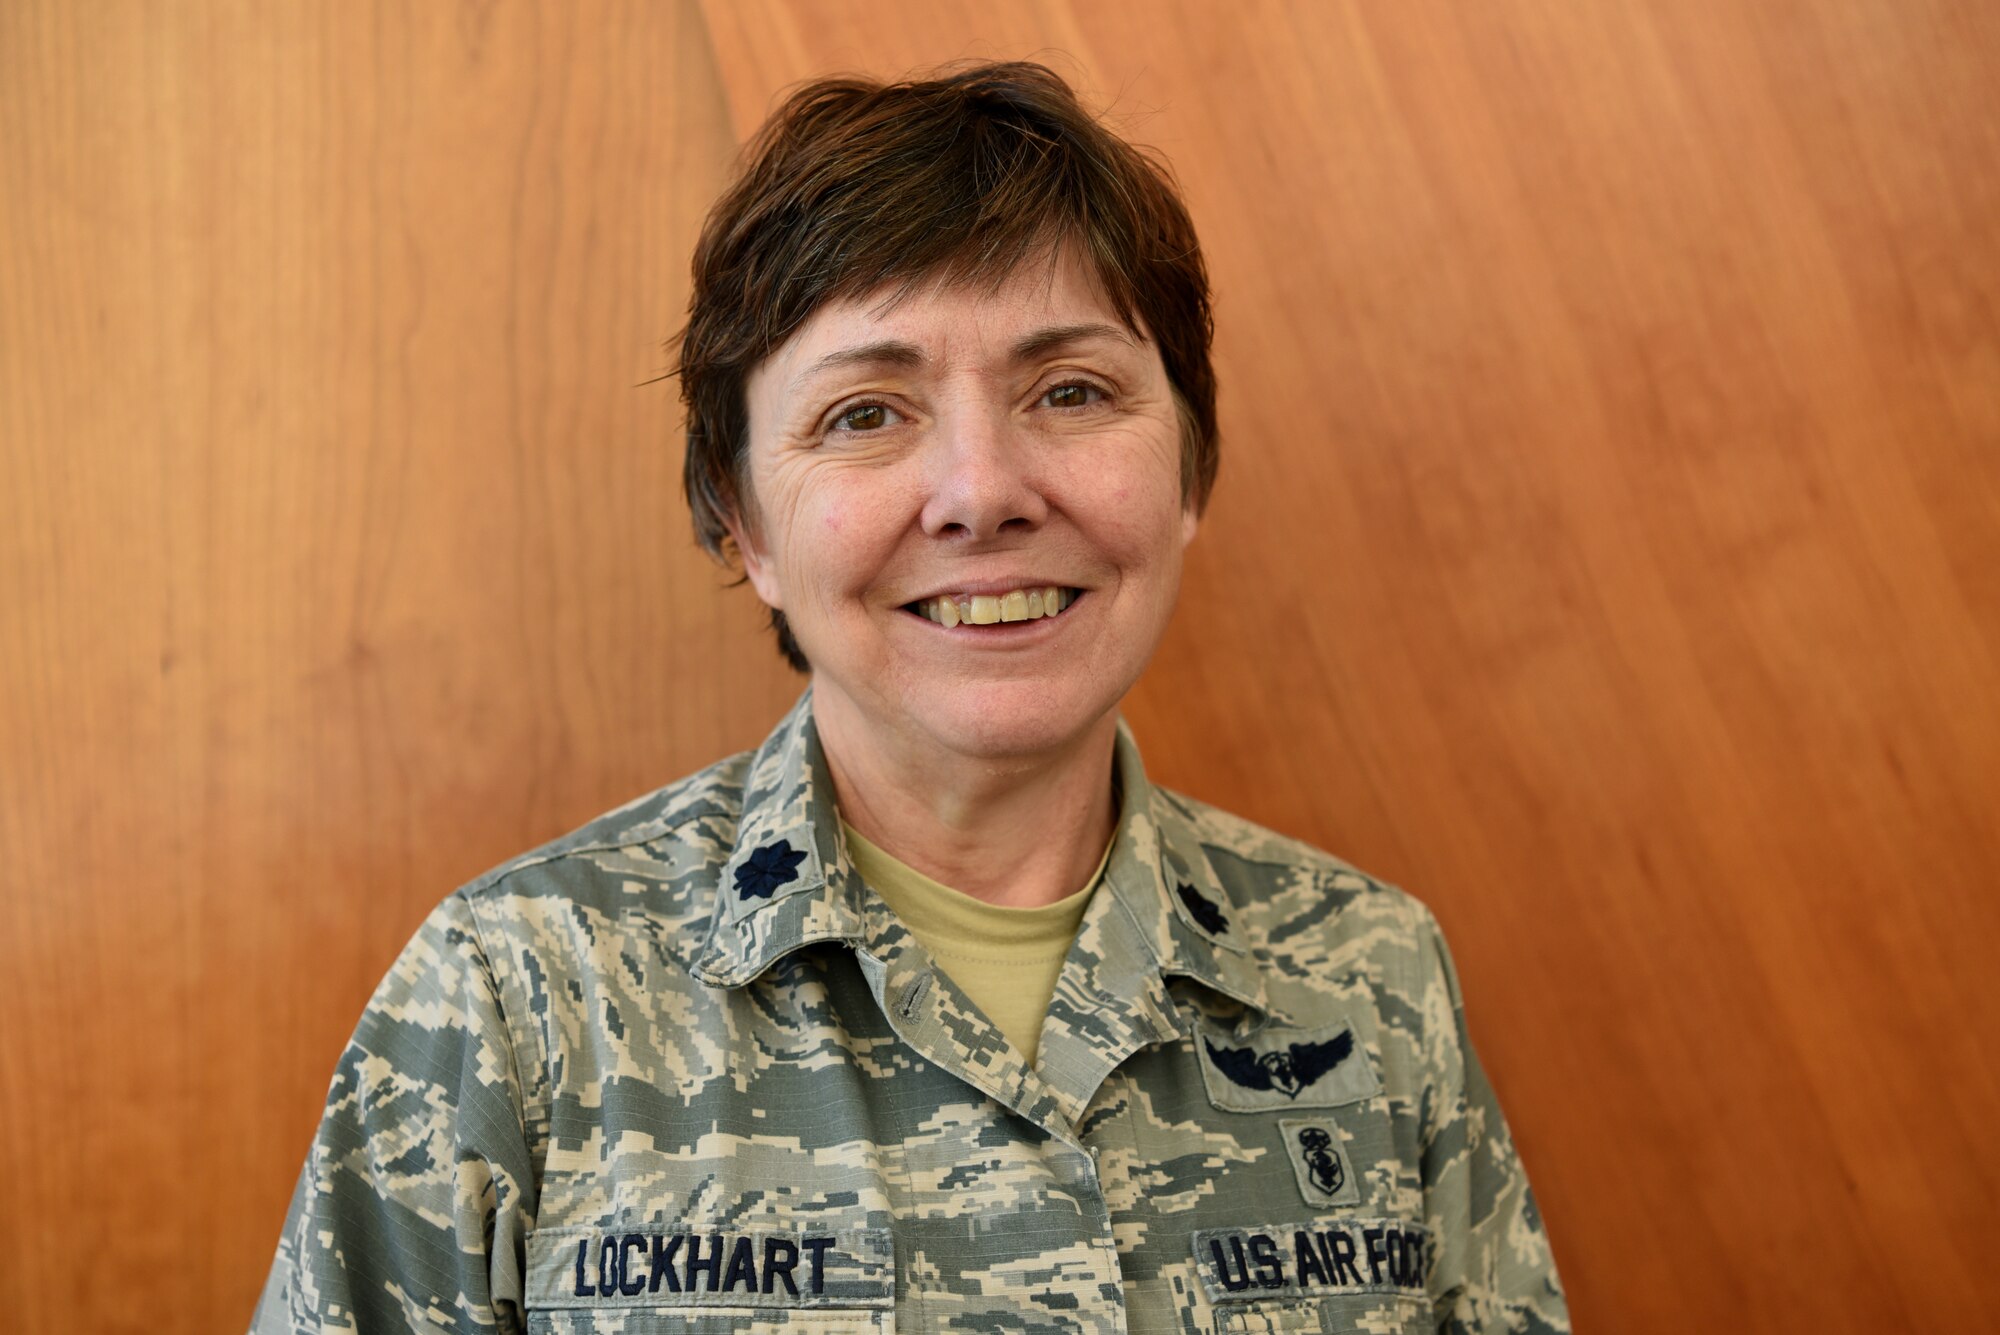 U.S. Air Force Lt. Col. Cheryl Lockhart, 20th Medical Group chief nurse, is the recipient of the 2018 Air Force Excellence in Nursing Leadership Award, Feb. 20, 2019.